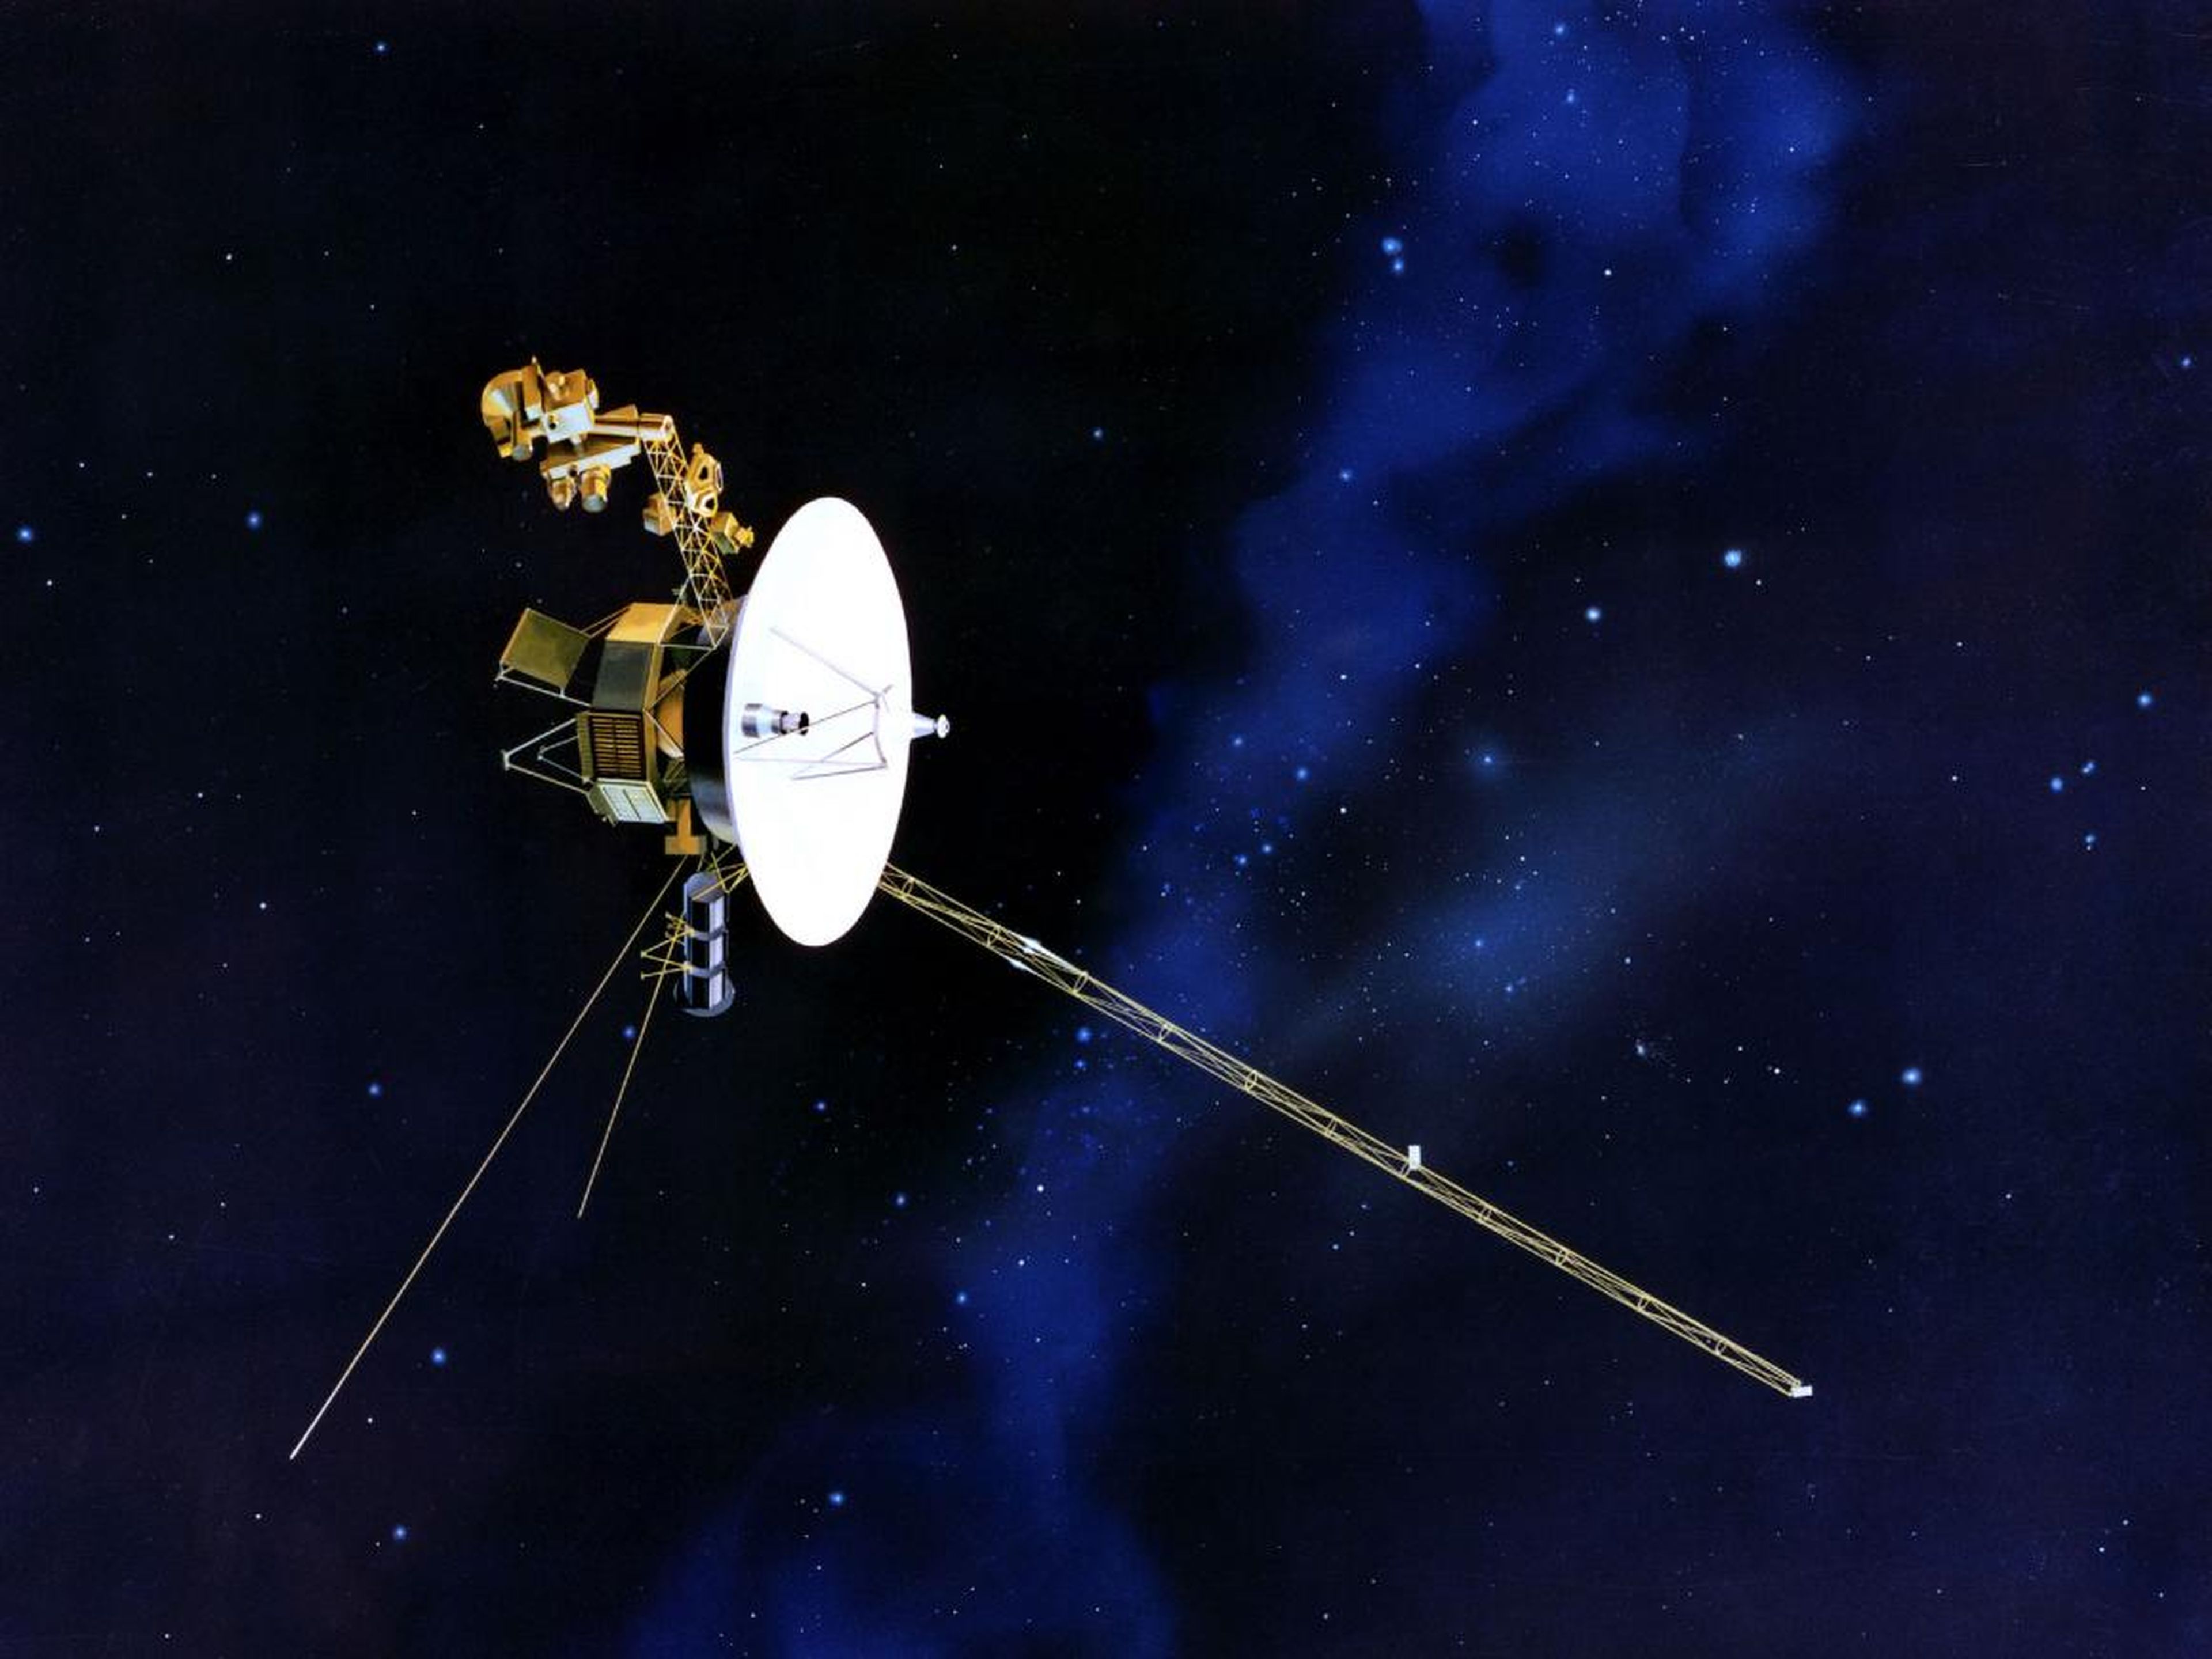 An illustration of NASA's Voyager spacecraft.